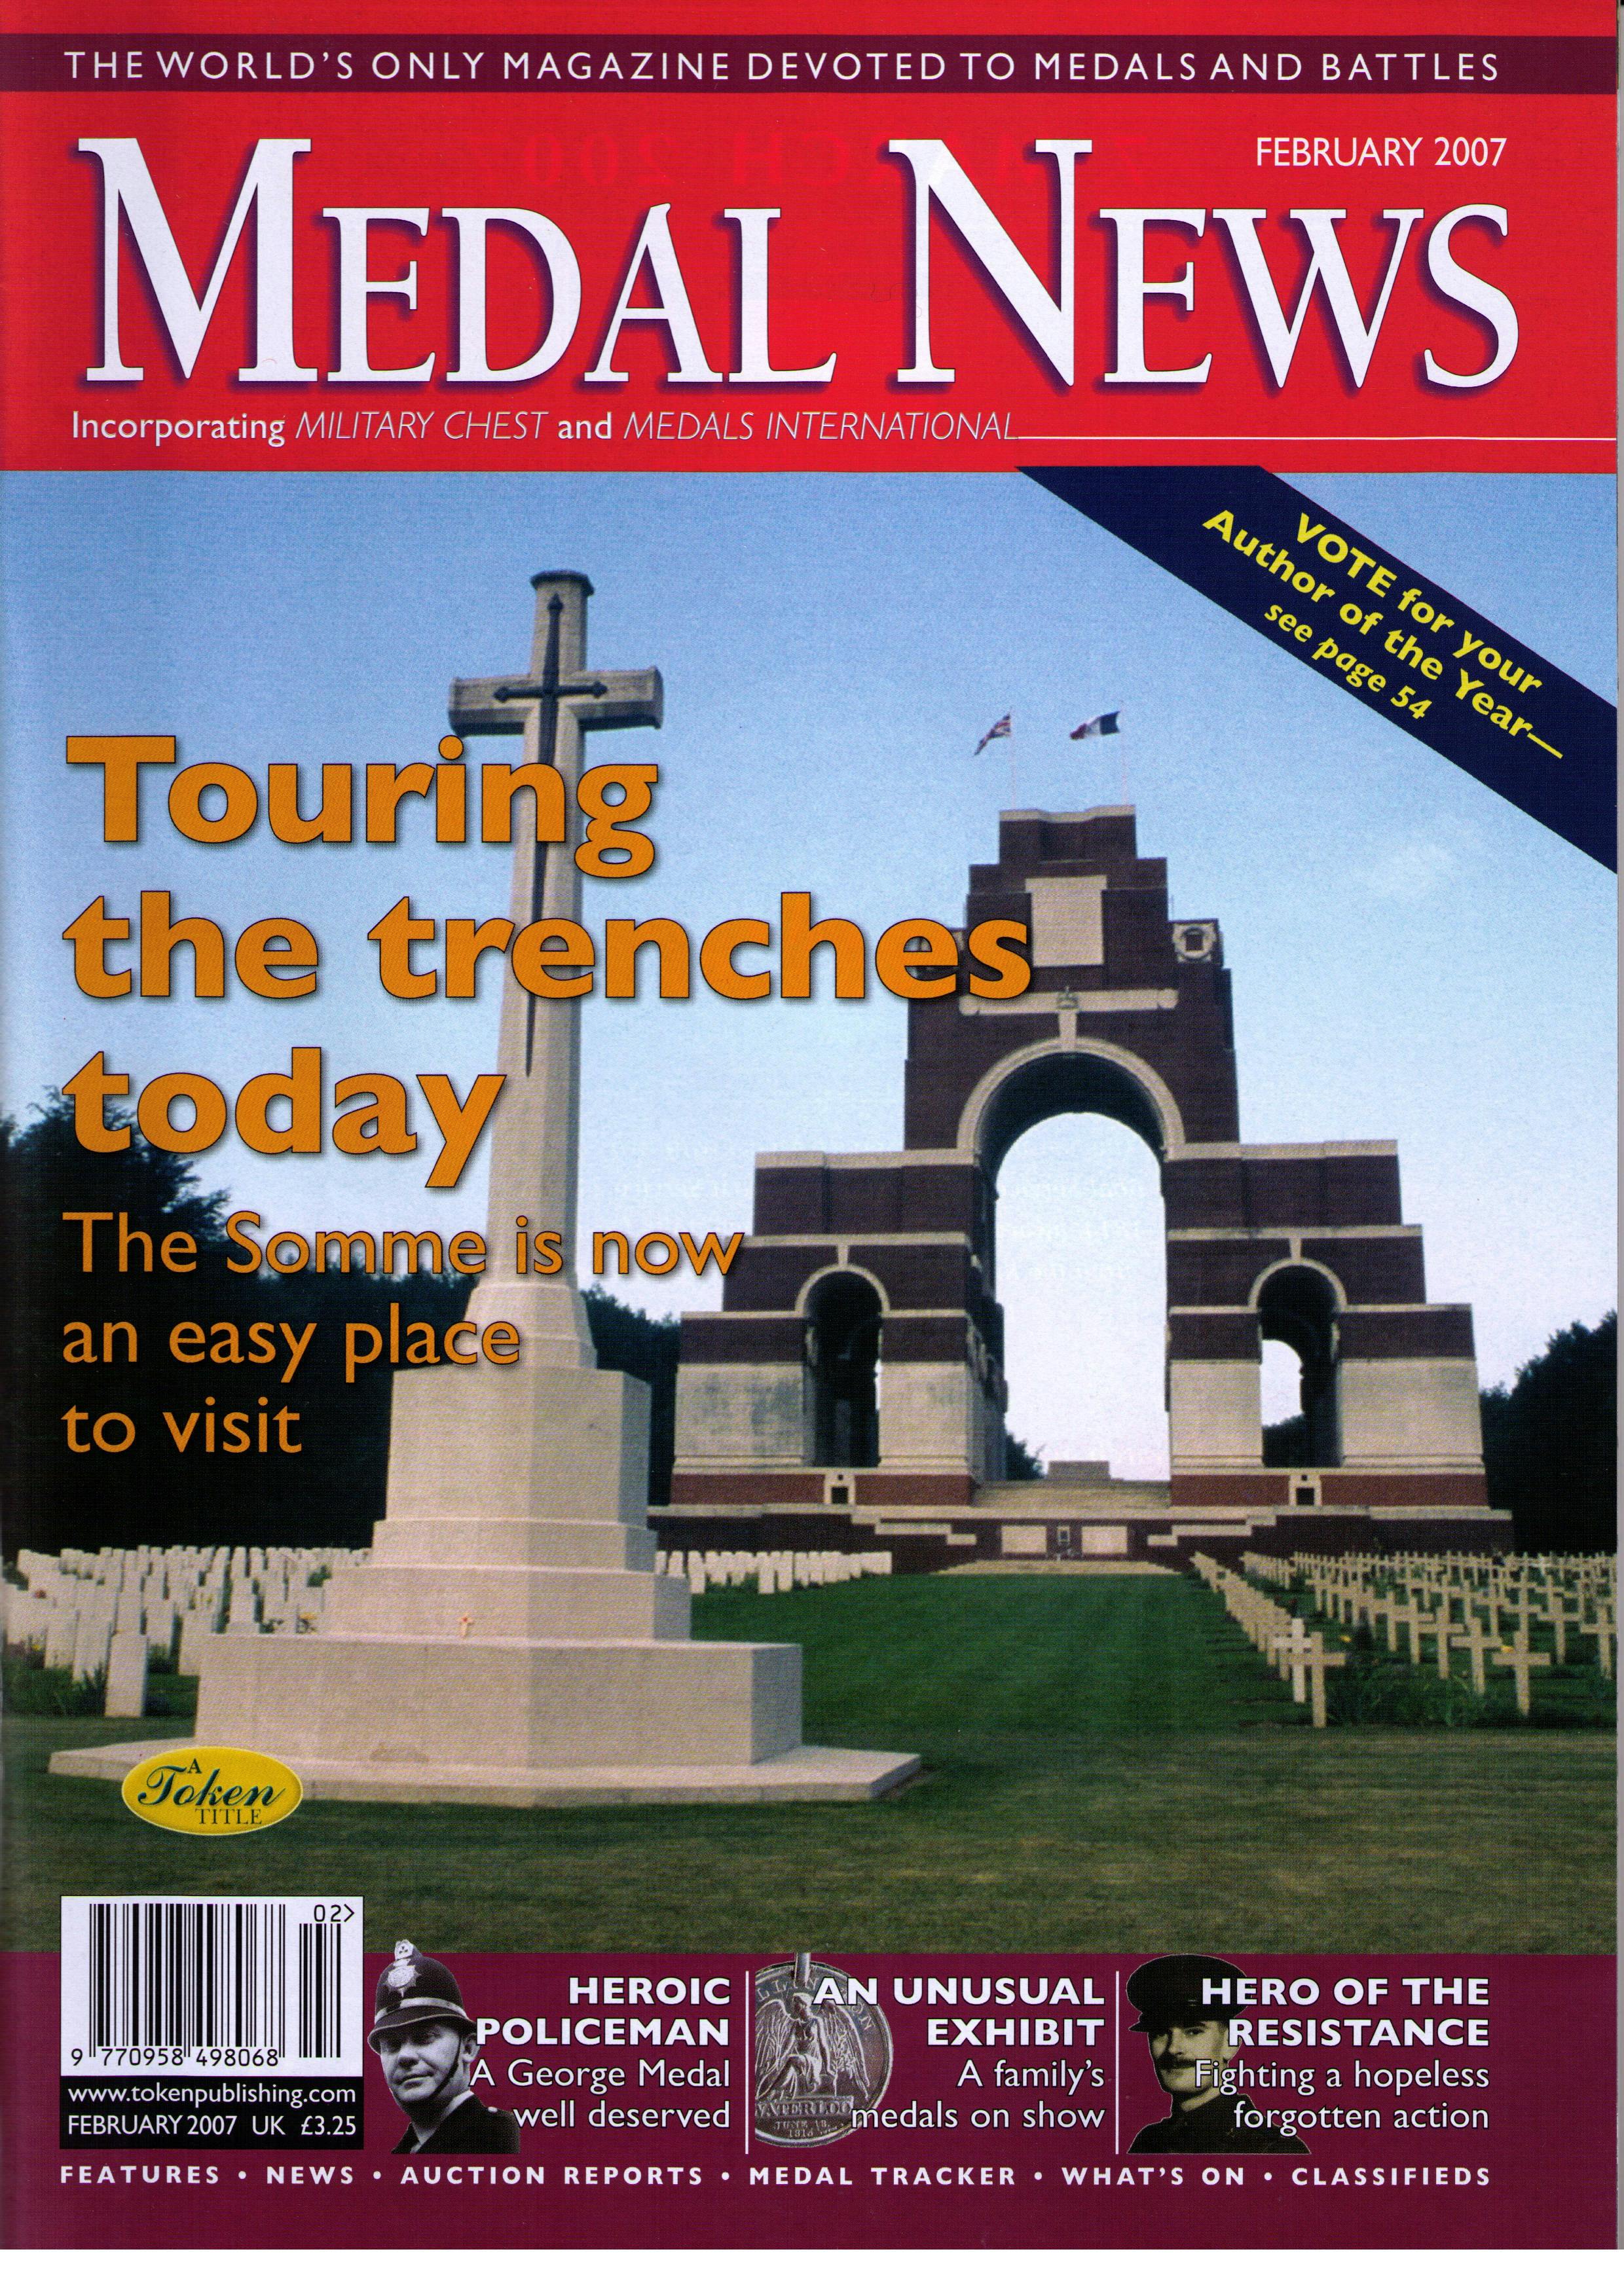 Front cover of 'Medals for morale?', Medal News February 2007, Volume 45, Number 2 by Token Publishing